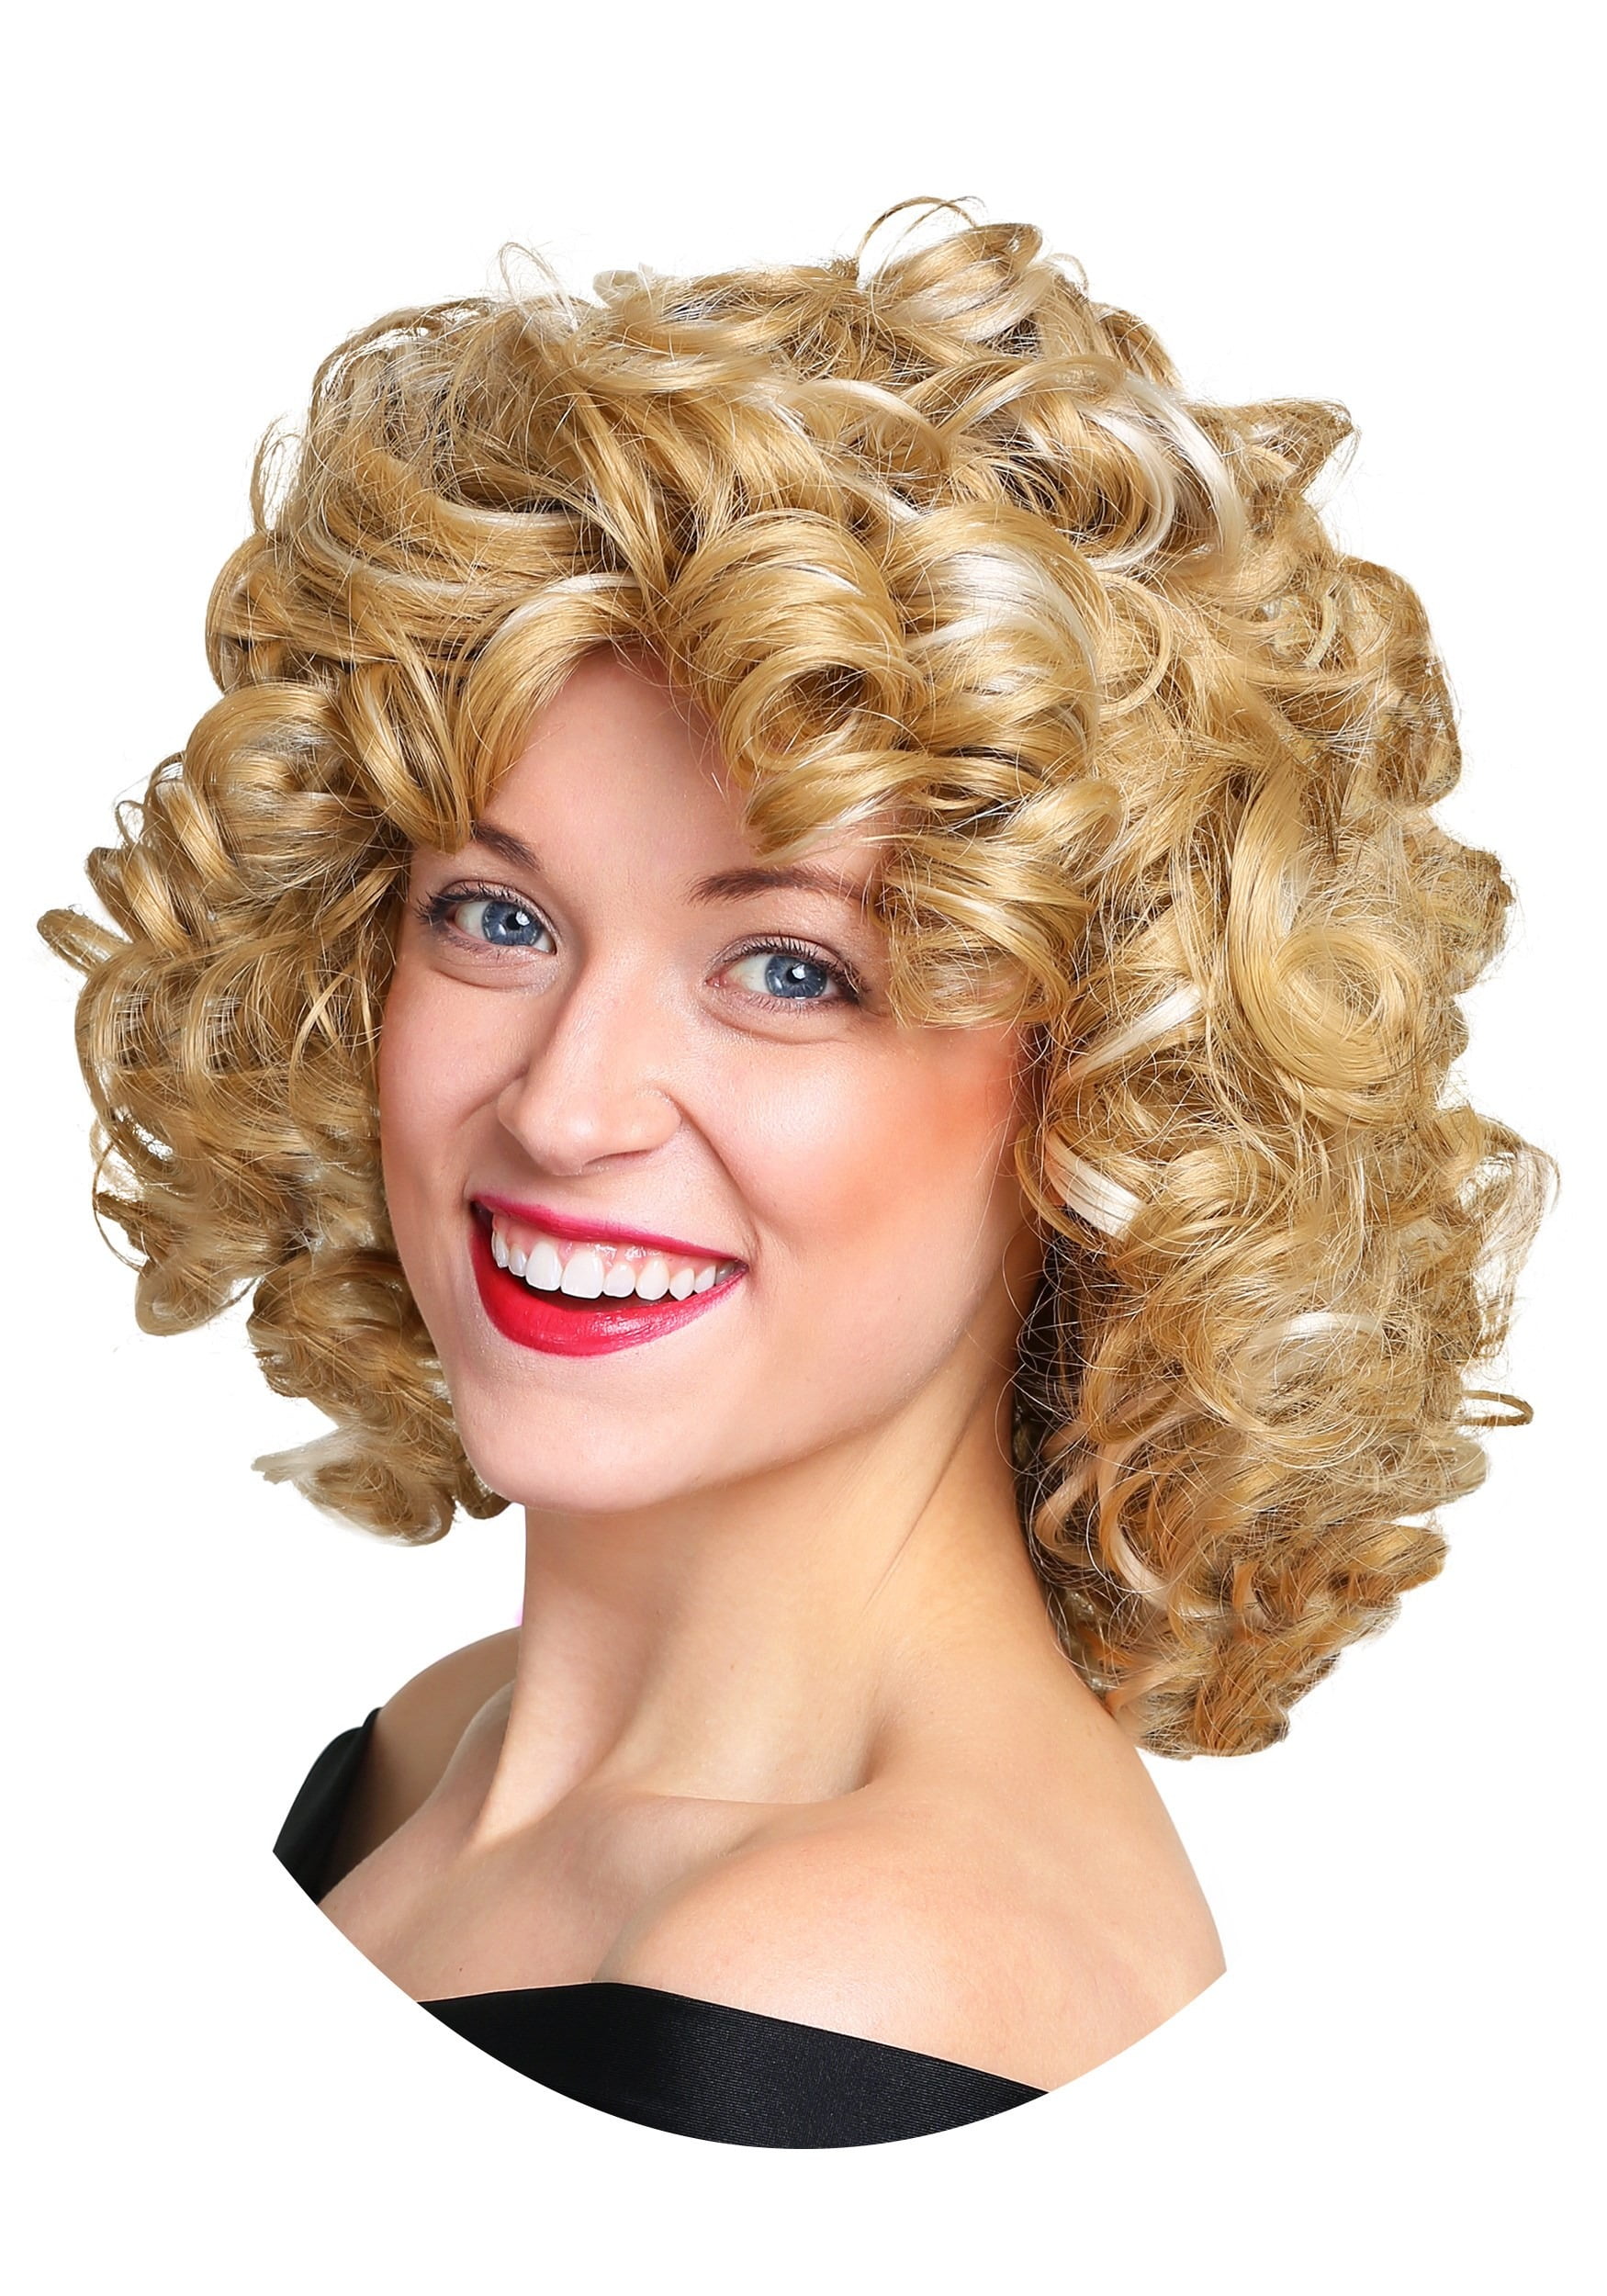 10 X MULLET NOVELTY HAIR WIG SANDY BLONDE COLOUR COLOR ADULT PARTY CUSTOM A 